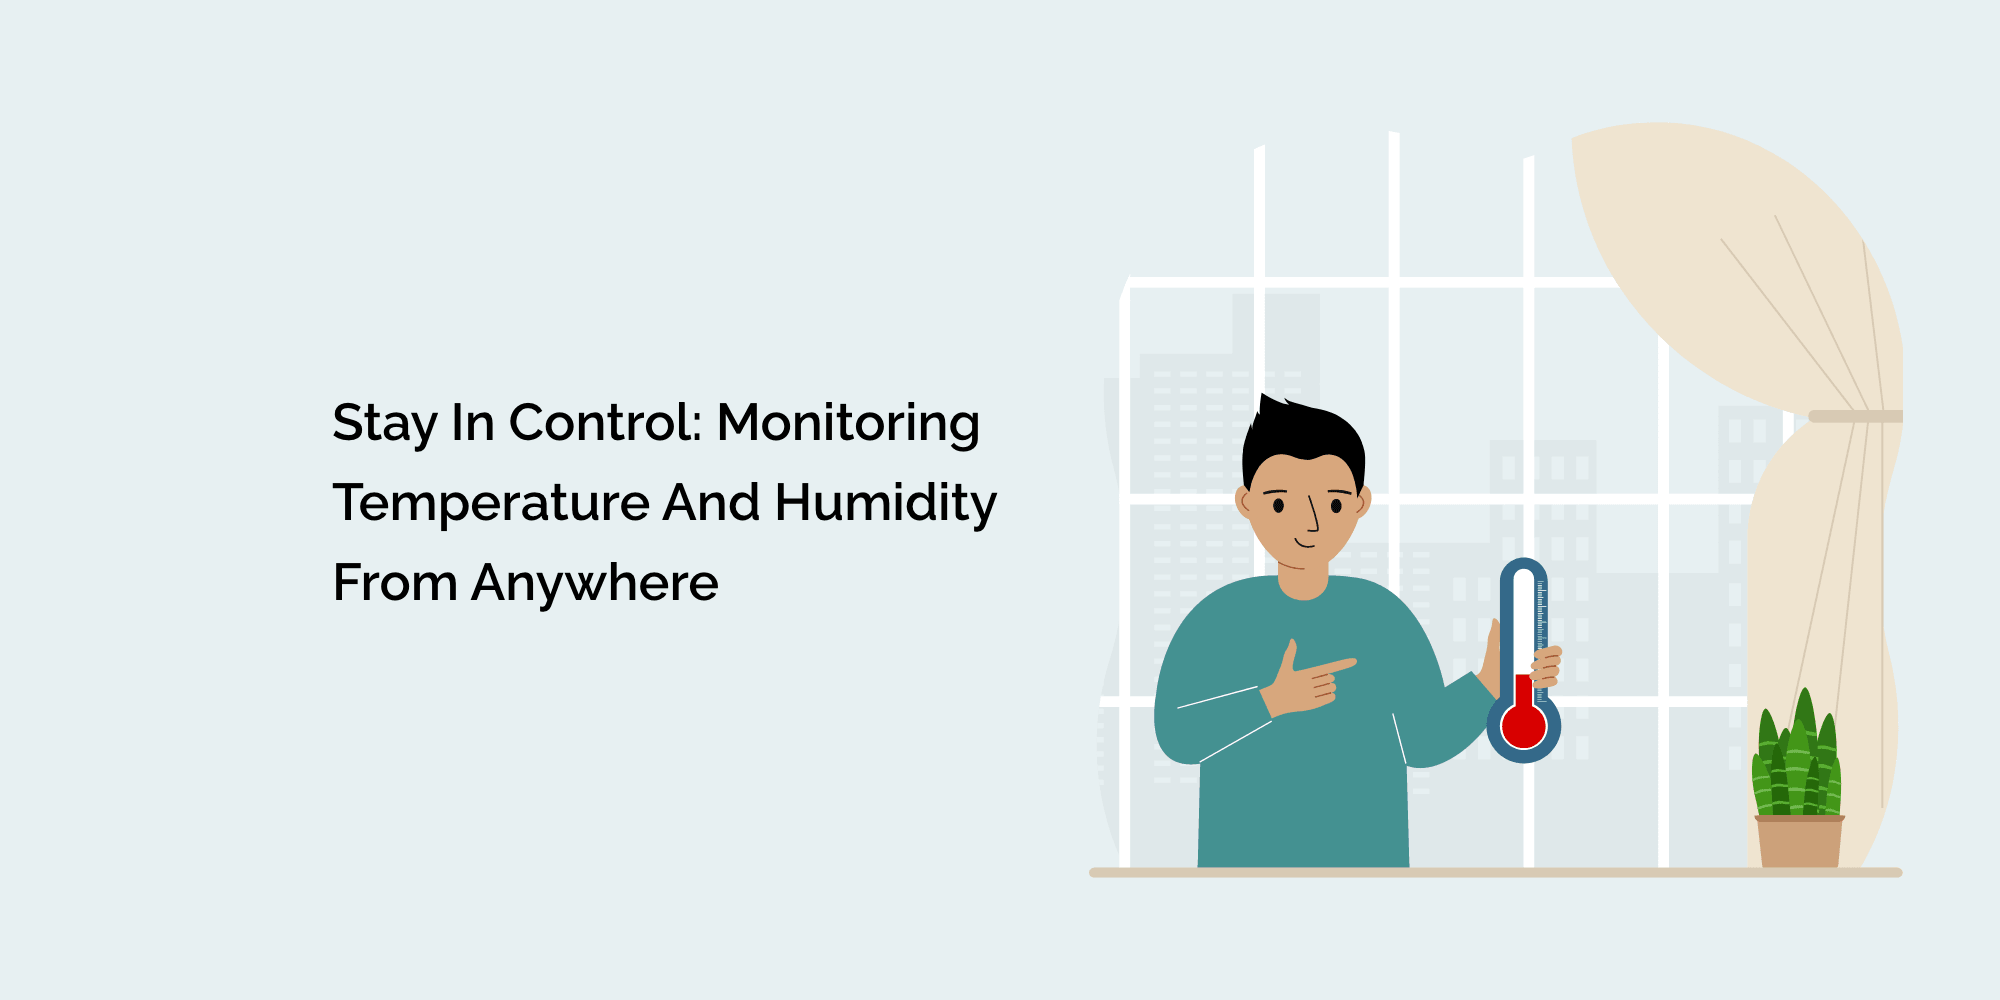 Stay in Control: Monitoring Temperature and Humidity from Anywhere